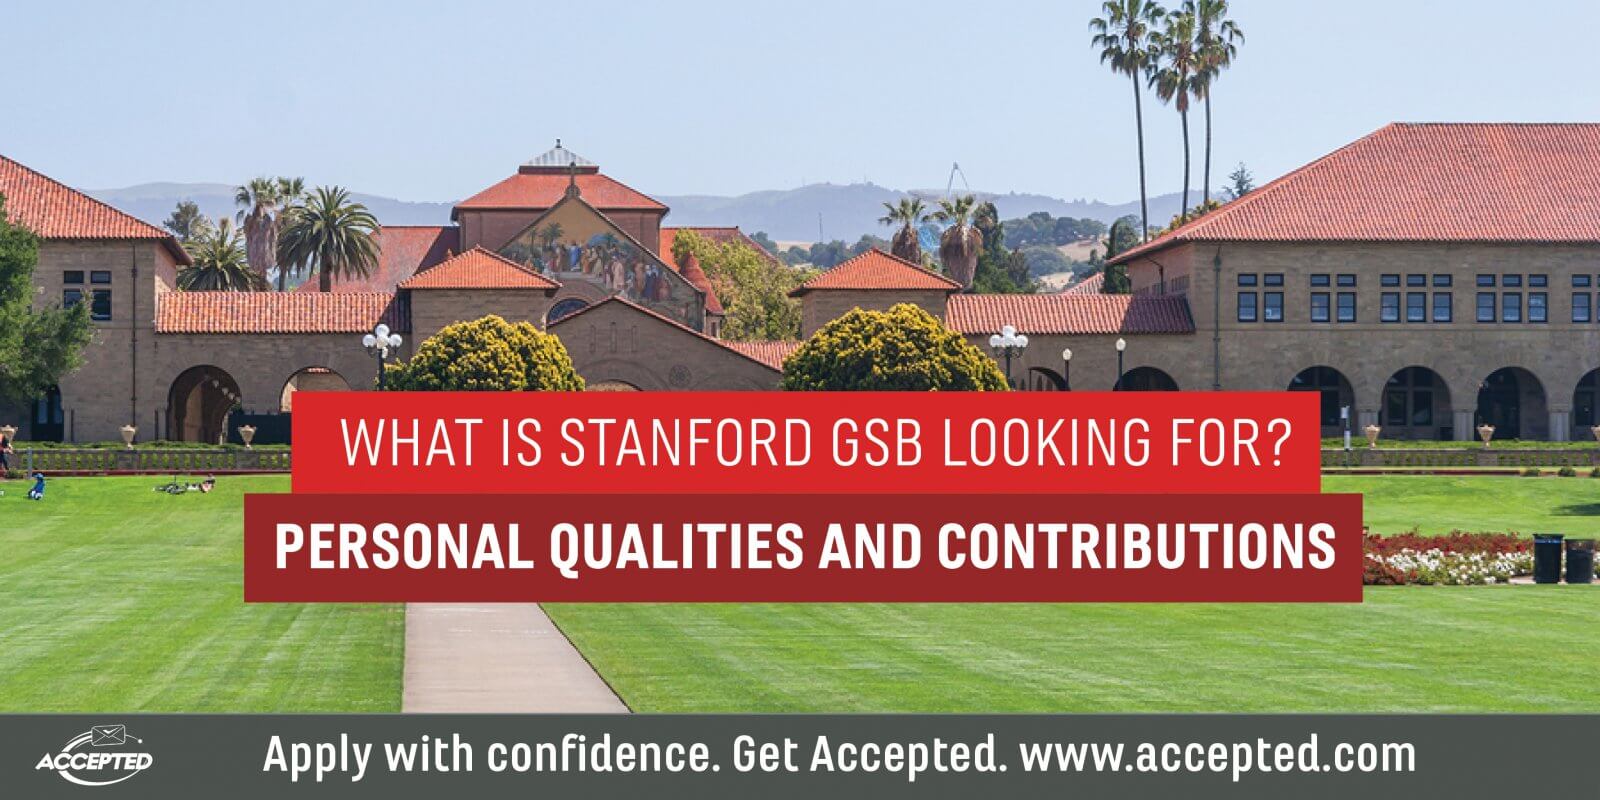 hanna-renaldi-s-blog-understanding-stanford-gsb-s-interest-in-personal-qualities-and-contributions